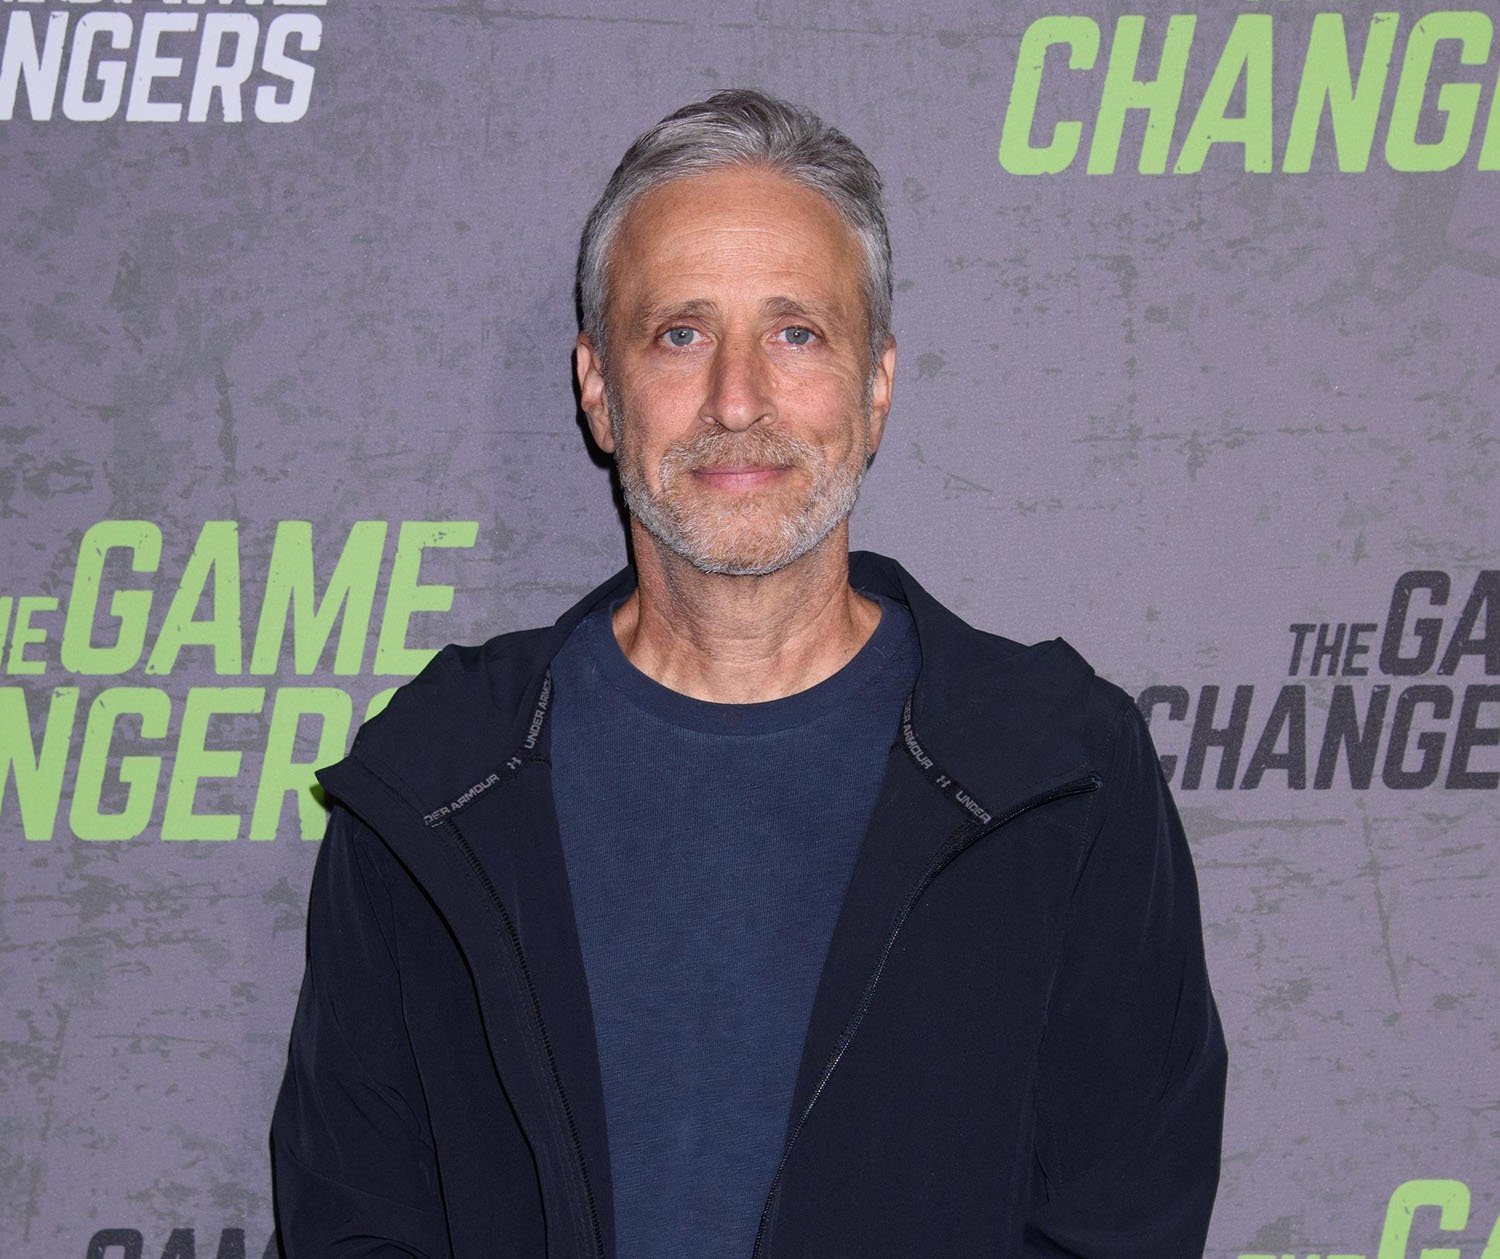 Jon Stewart returning to The Daily Show as parttime host through the